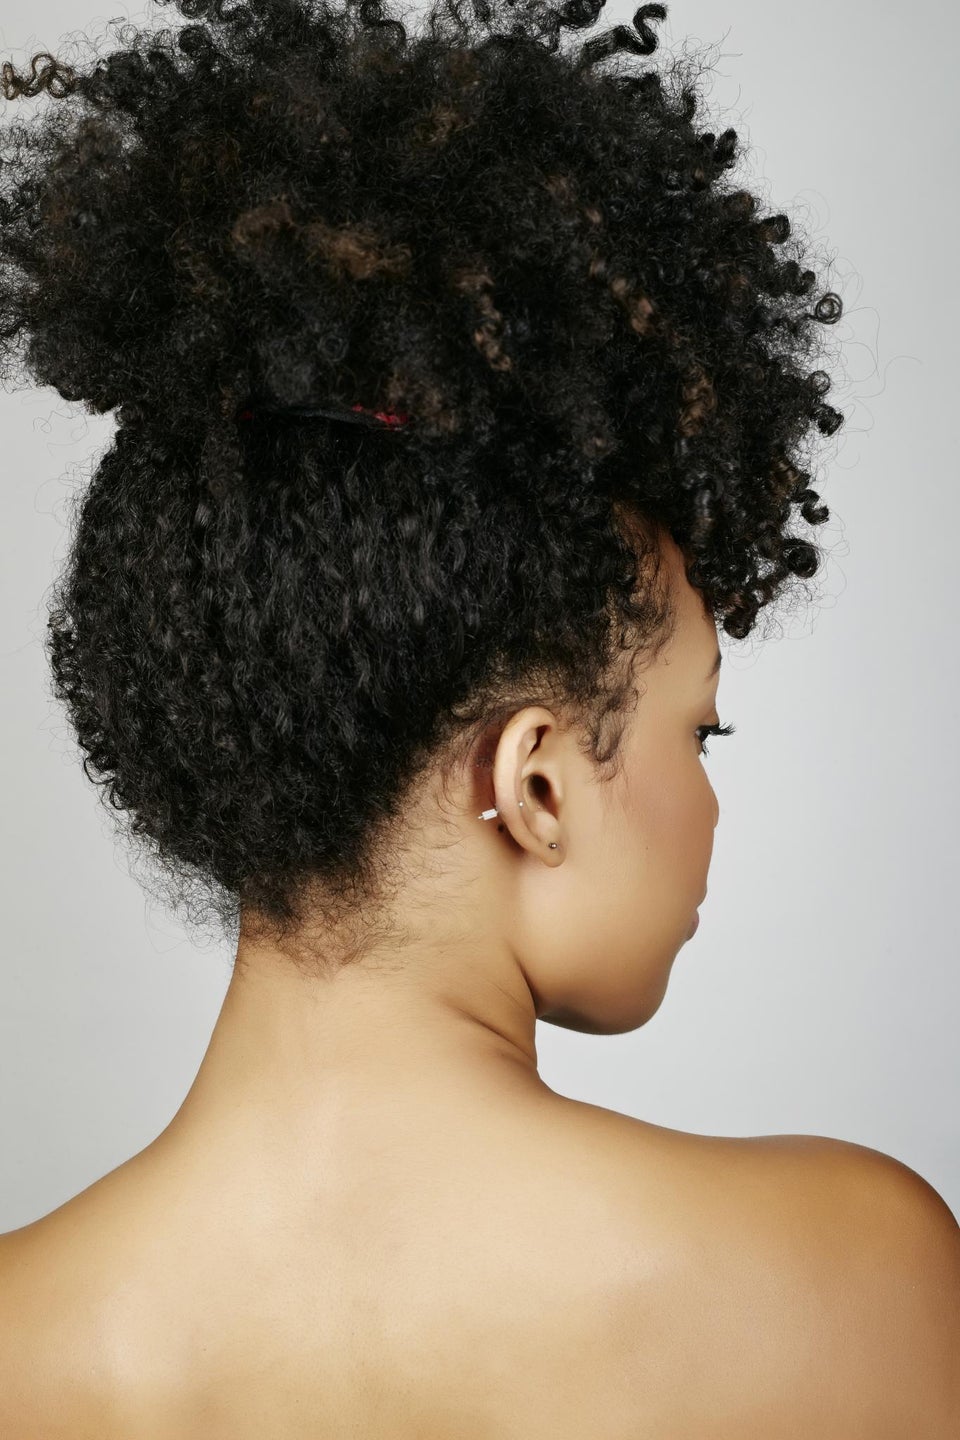 Ask The Experts: When is it Okay to Use Sulfates on Your Curls?